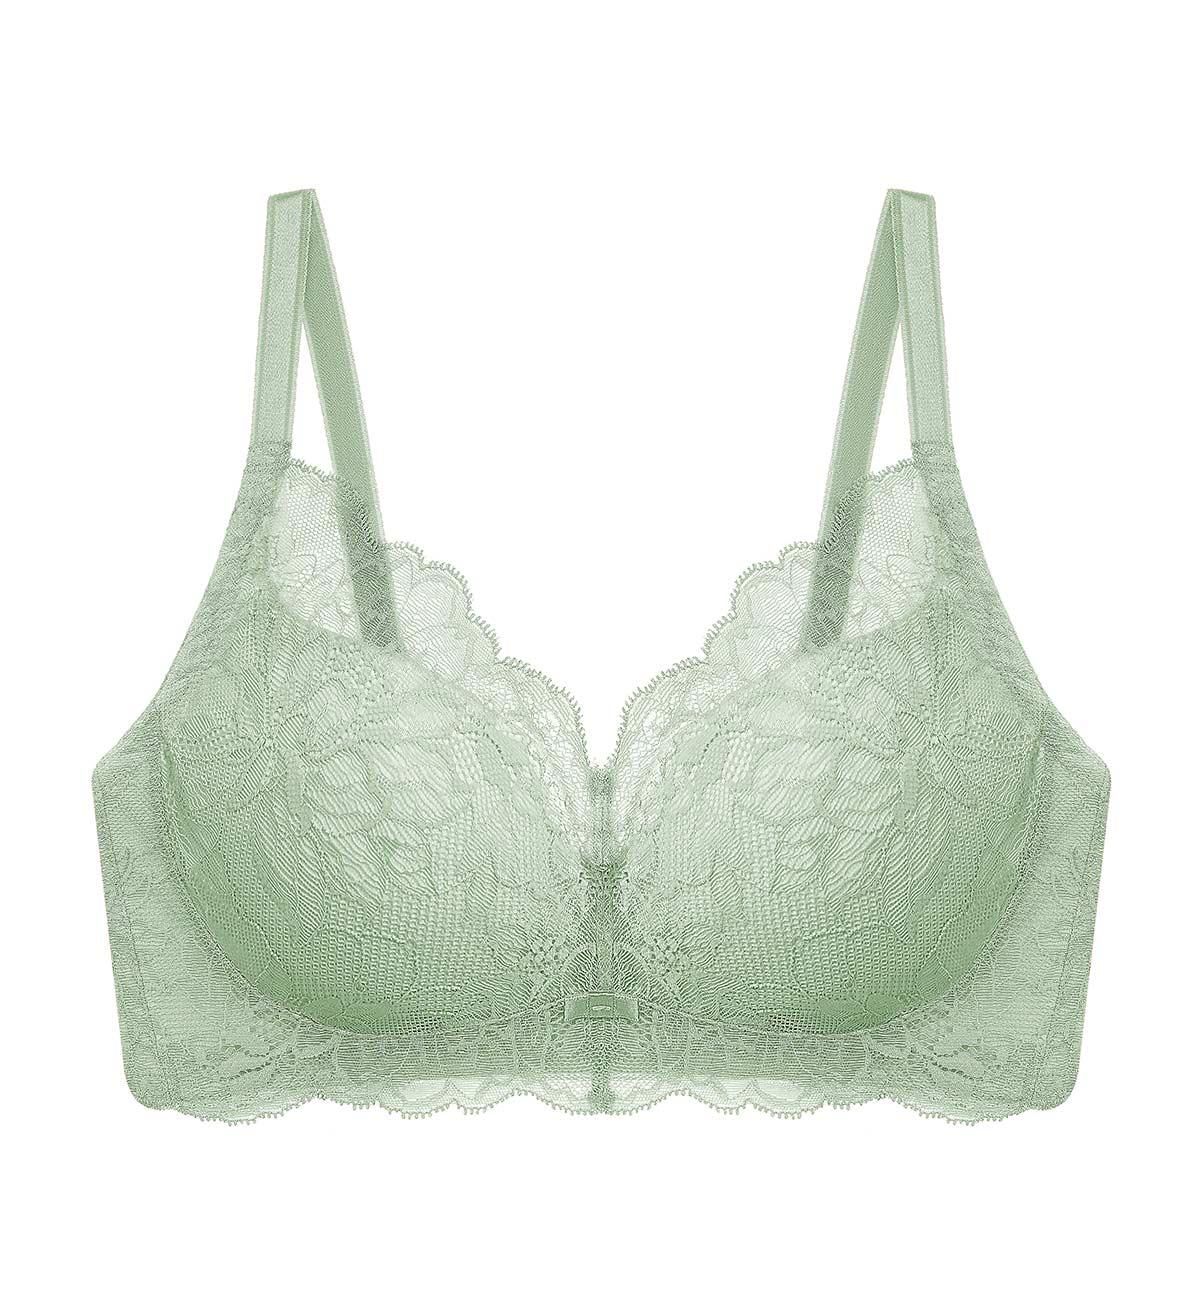 Natural Elegance Sleek Non-Wired Padded Bra in Abstinthe